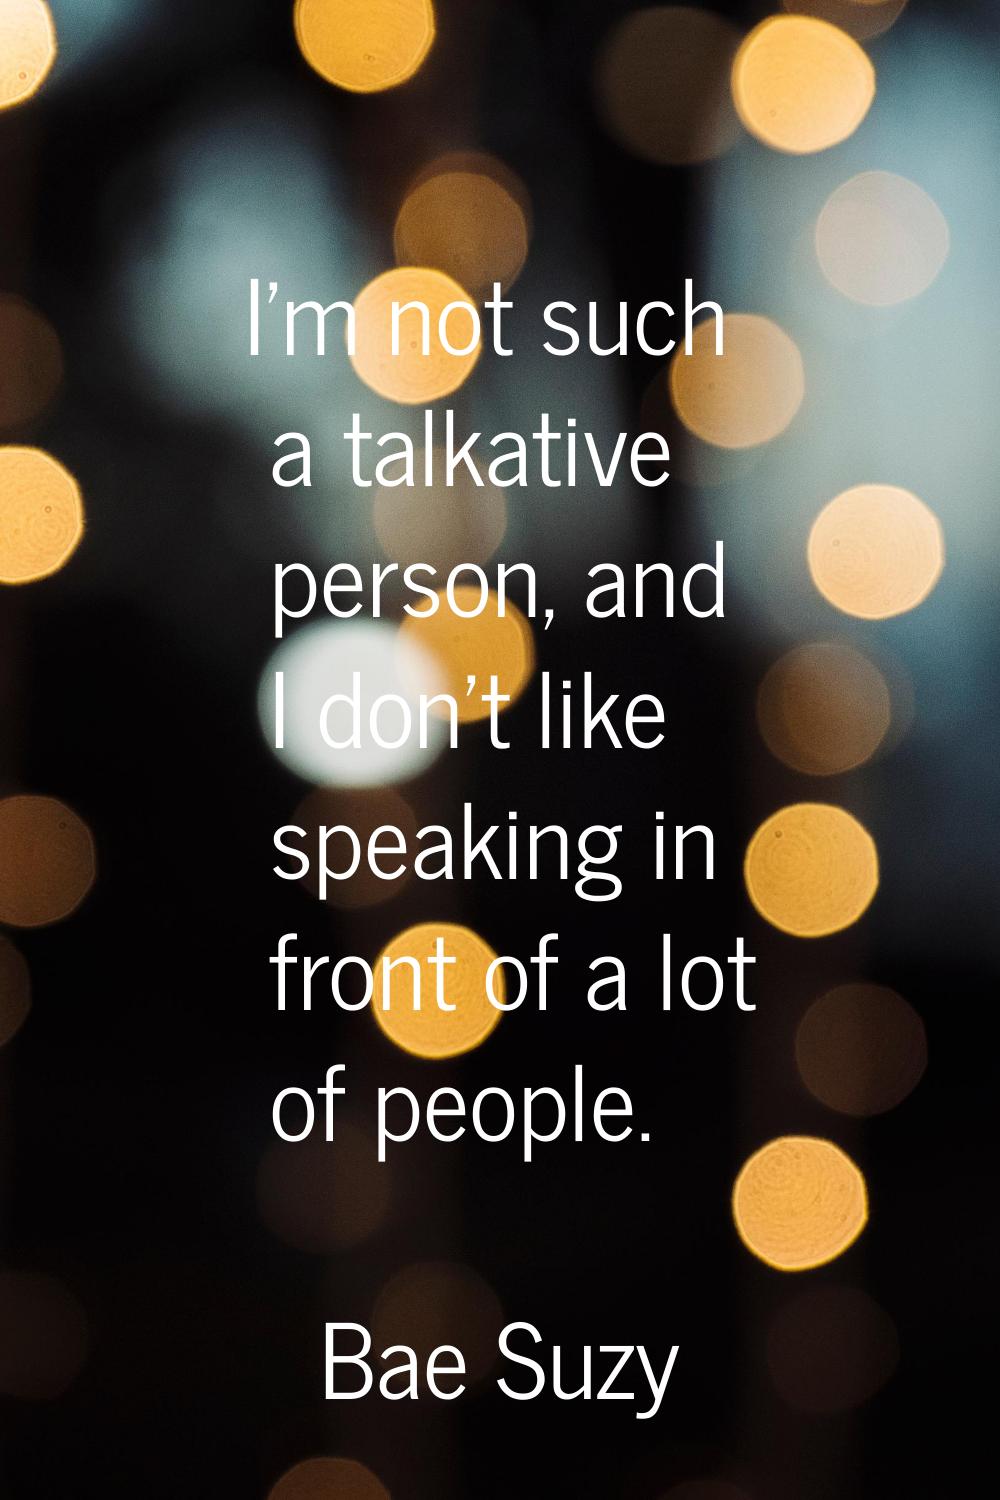 I'm not such a talkative person, and I don't like speaking in front of a lot of people.